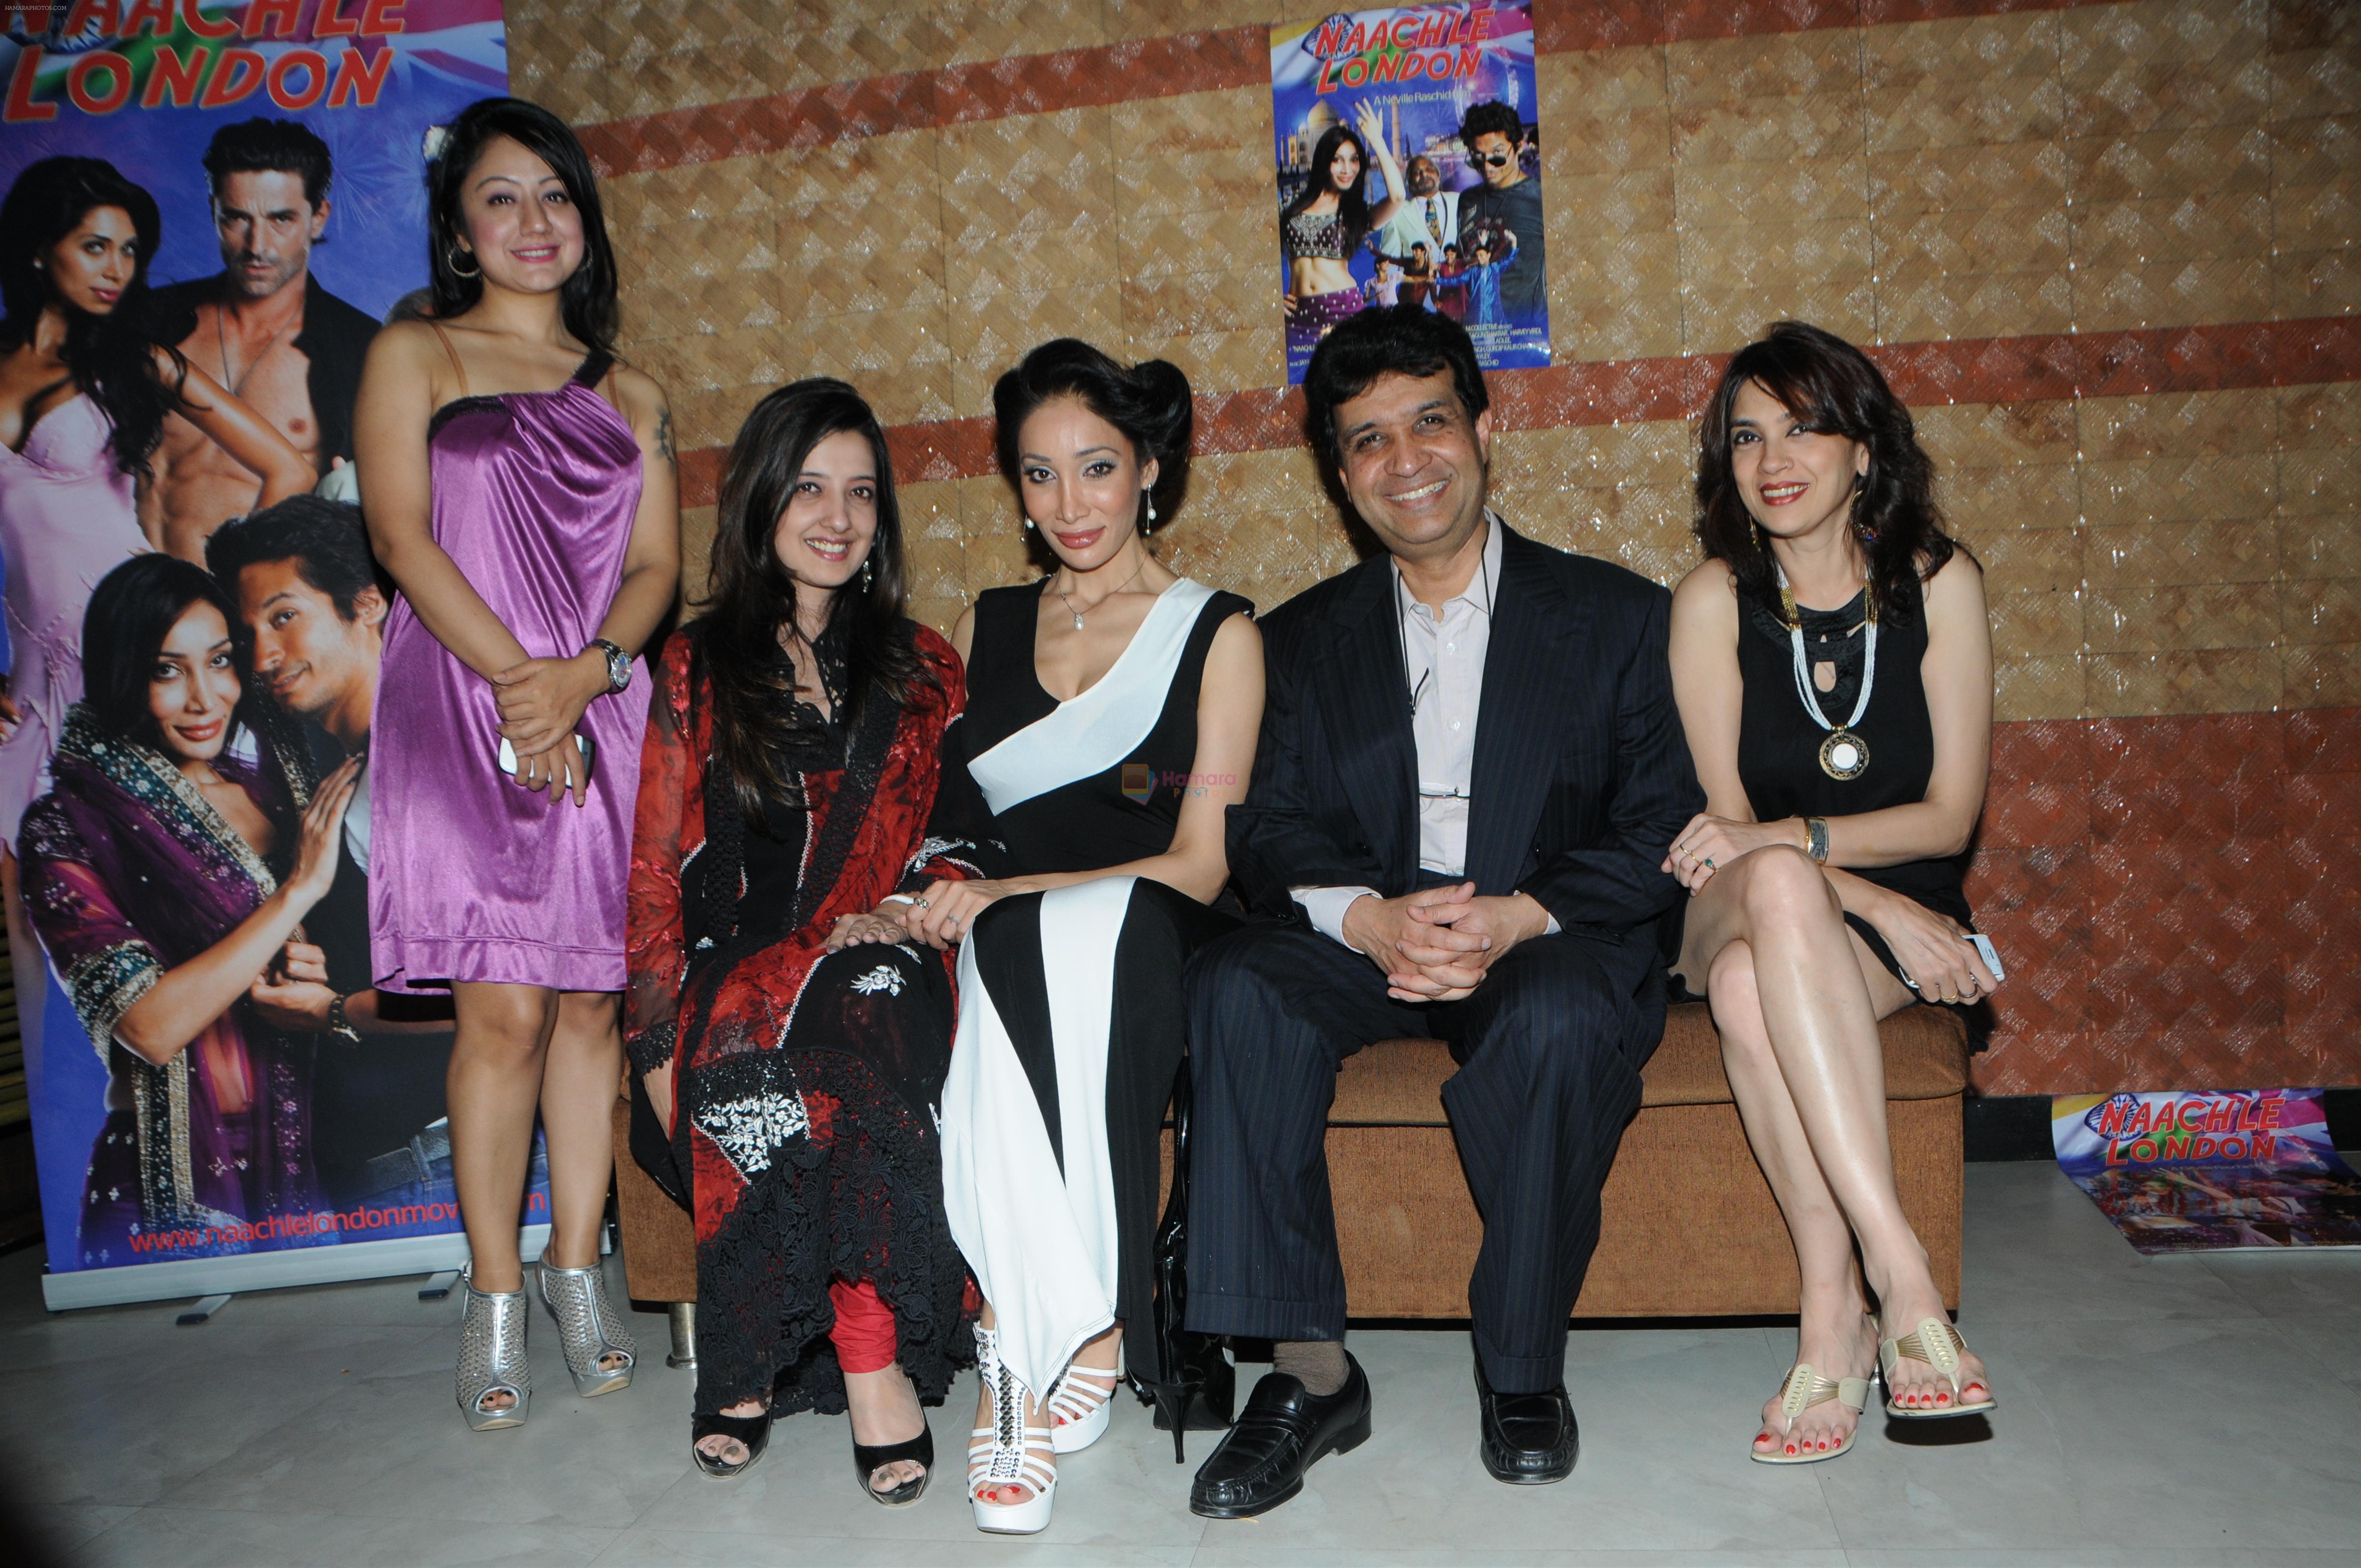 Madhuri Pandey, Amy Billimoria, Sofia Hayat, Neville Raschid at the Grand Unveiling of first look of Aviary Films NAACHLE LONDON a danceful affair in La Patio, Mumbai on 28th Feb 2013